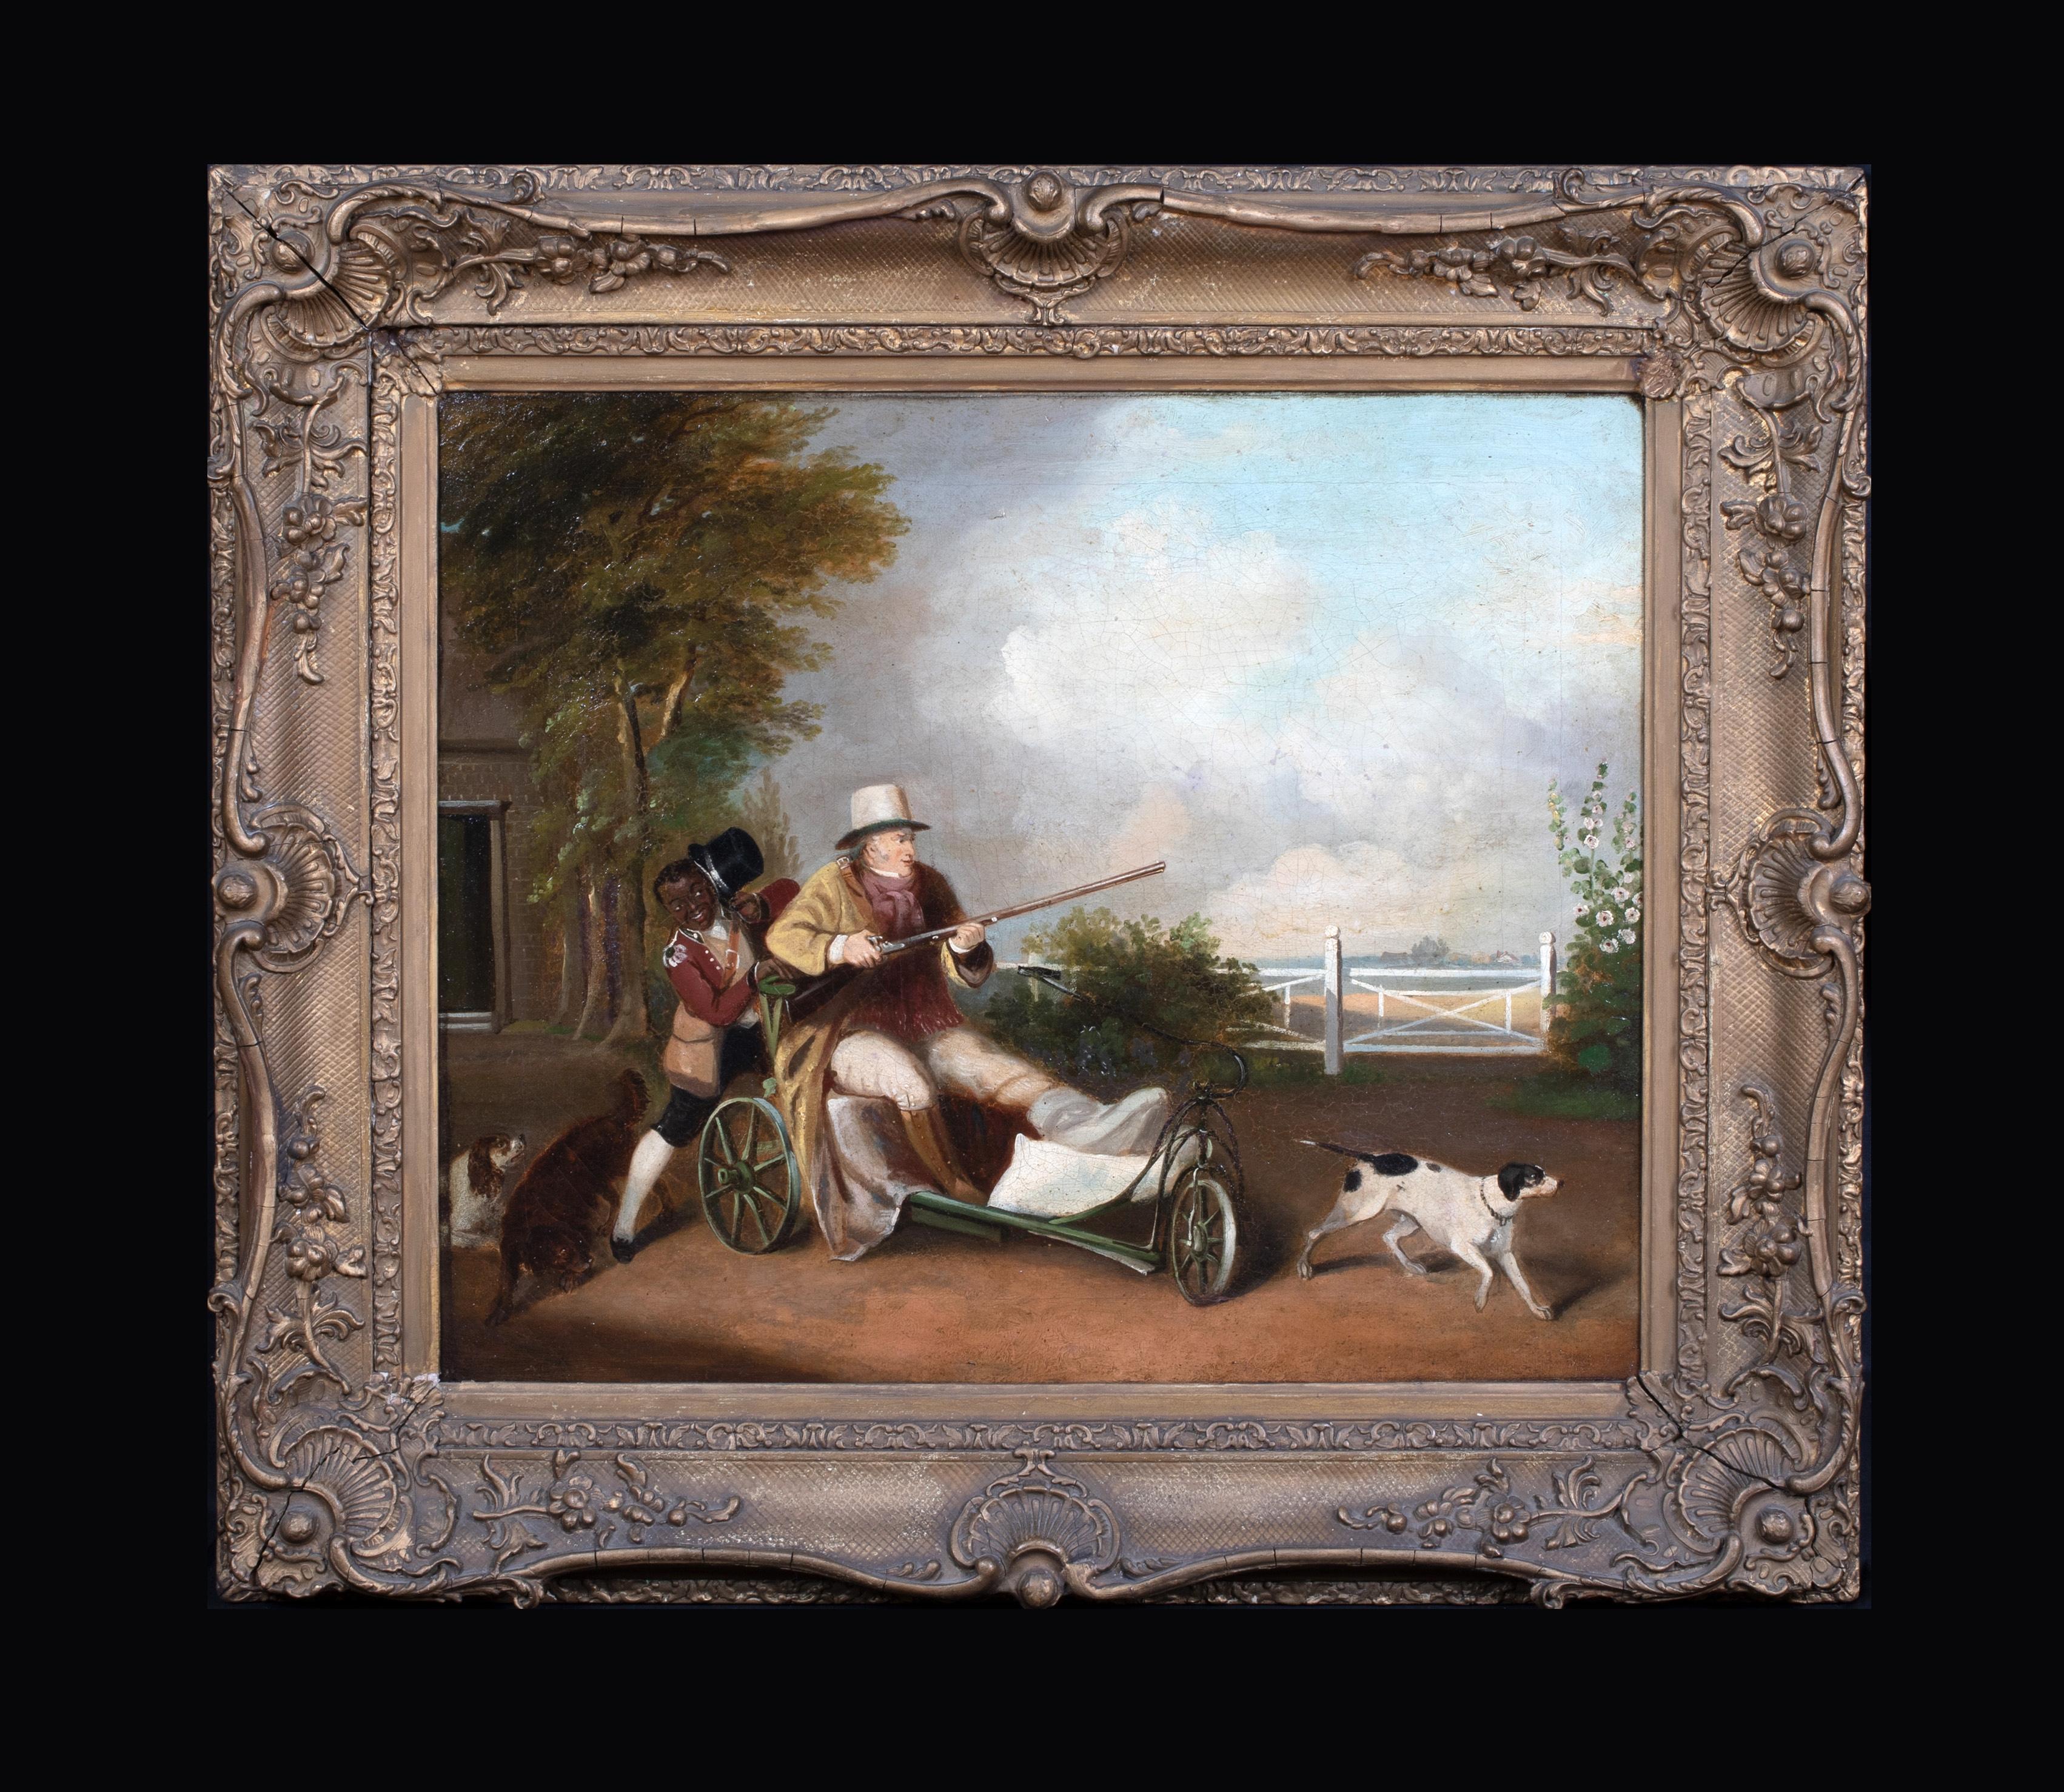 A Landowner, Servant & Dogs - Before the Hunt, 19th Century  - Gray Portrait Painting by Unknown